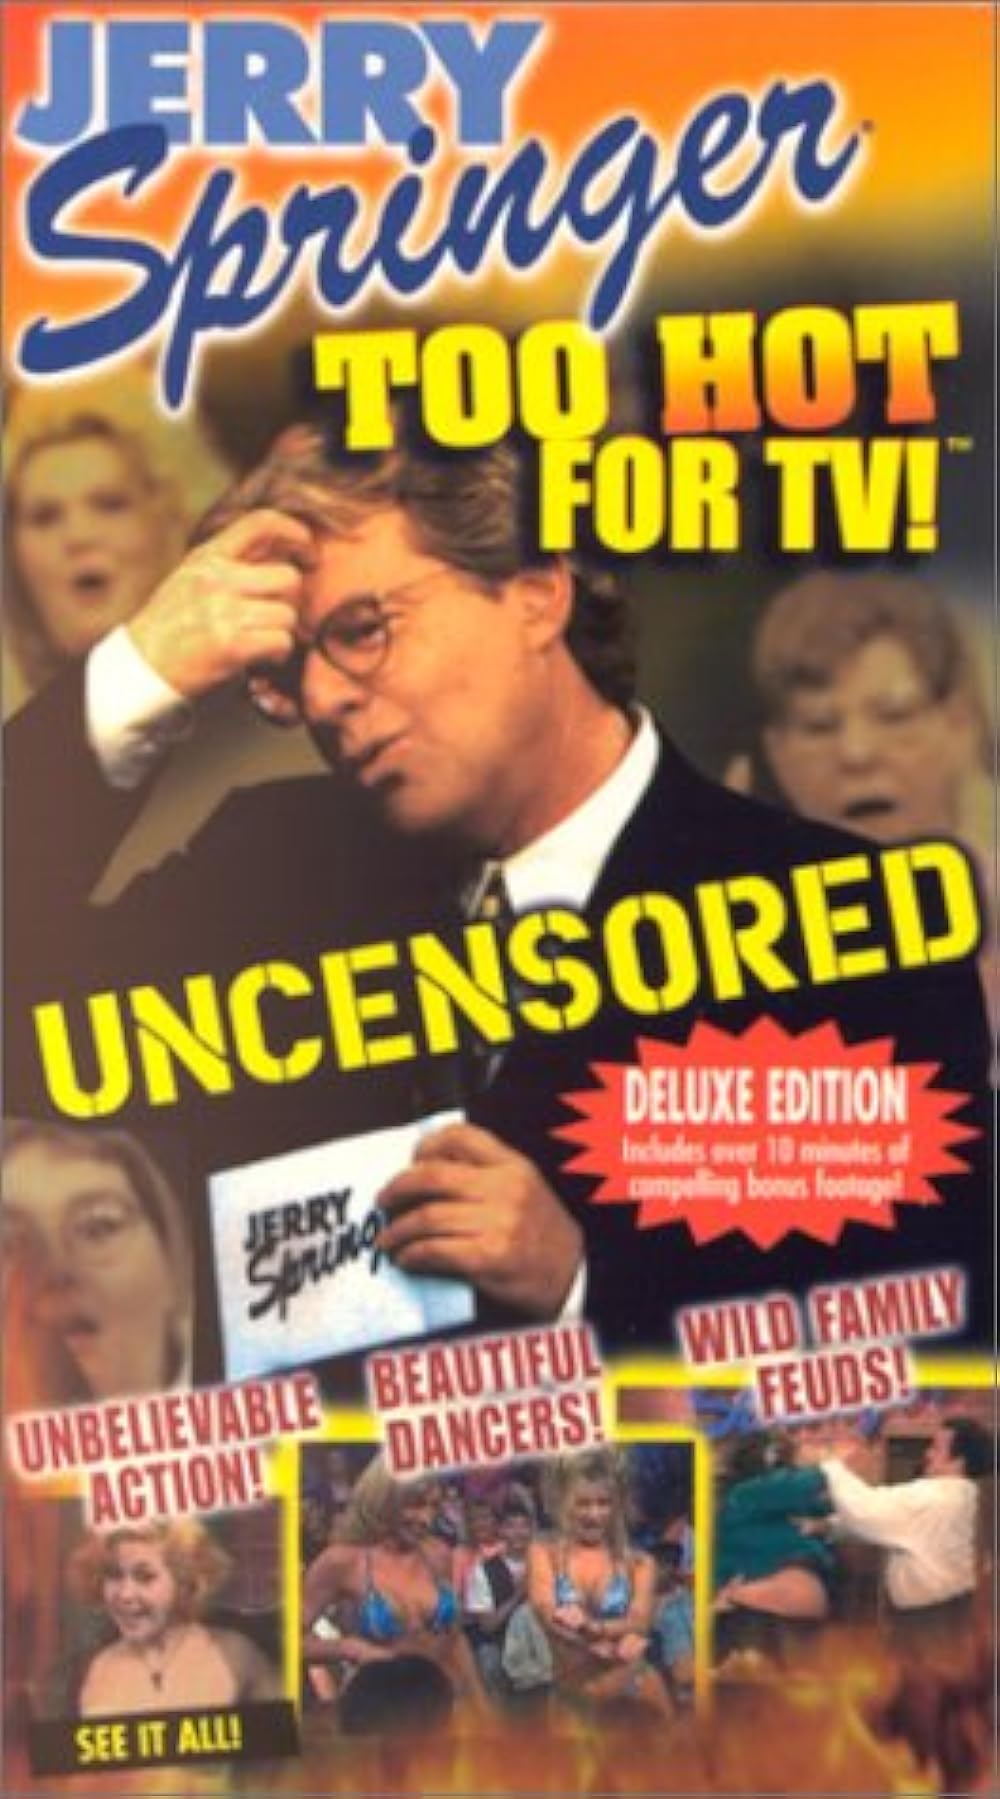 christine de pizan recommends jerry springer x rated pic